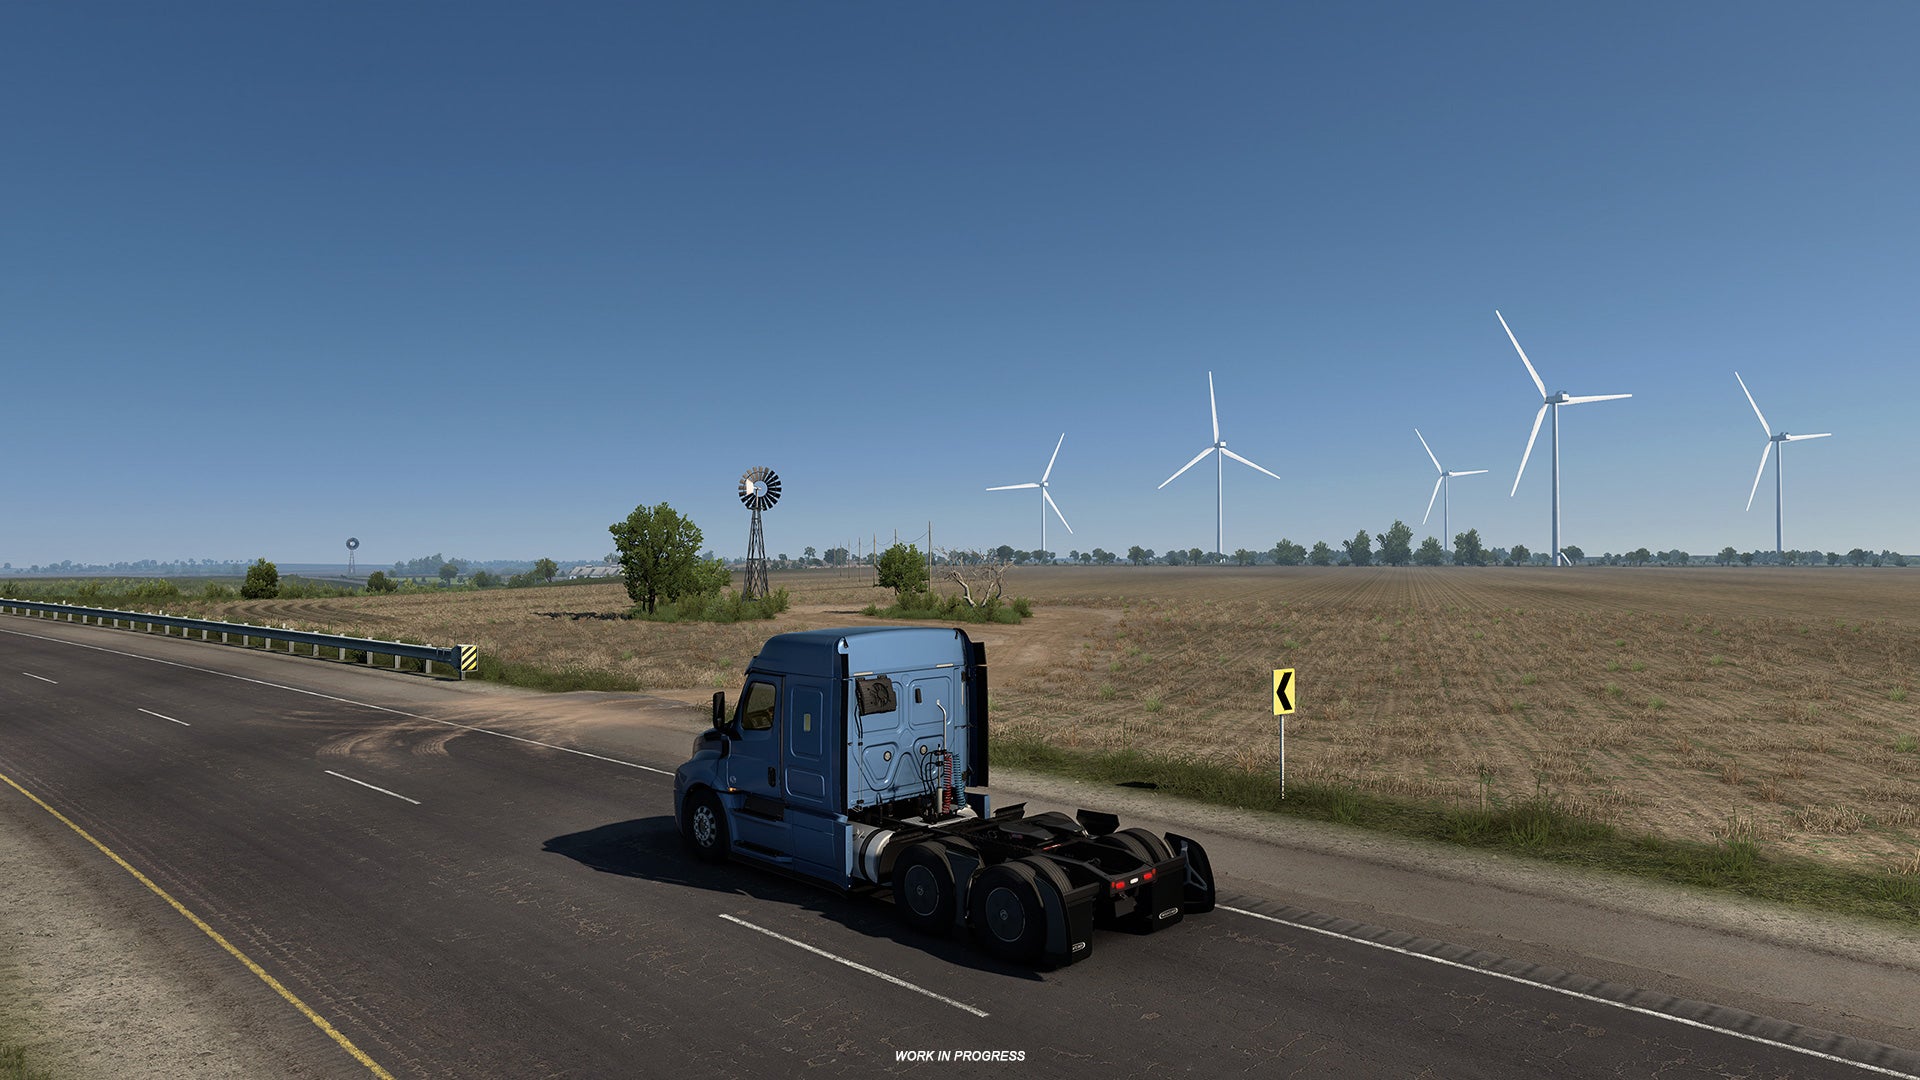 American Truck Simulator Texas - A truck cab drives down a two lane road with fields and wind turbines in the background.